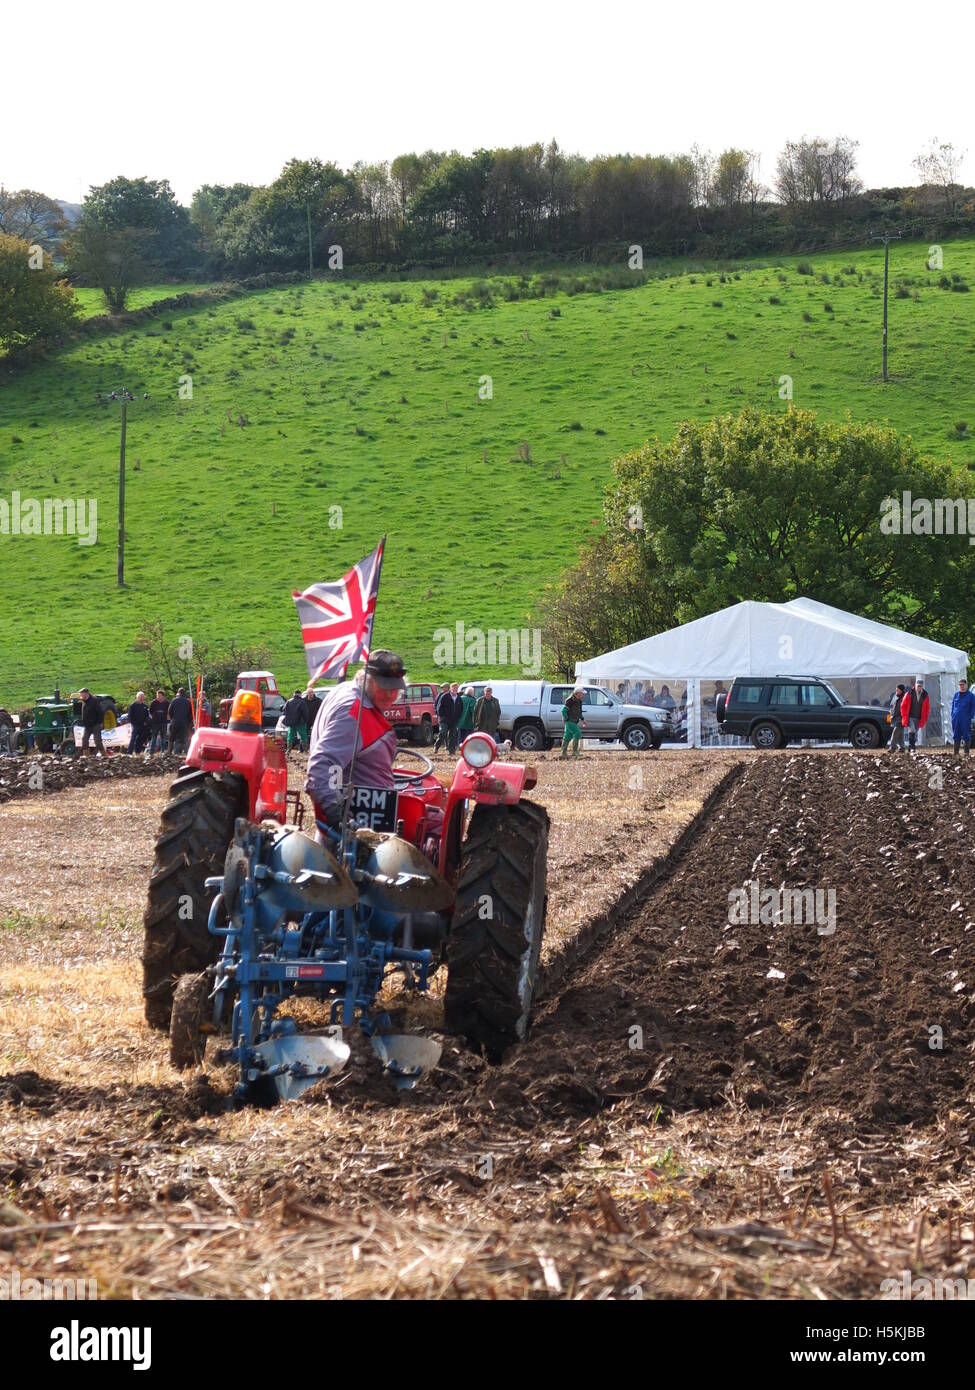 A farmer flying the Union Jack flag from his tractor competing in the Ashover Ploughing Match held at Highoredish Farm, Derbys. Stock Photo